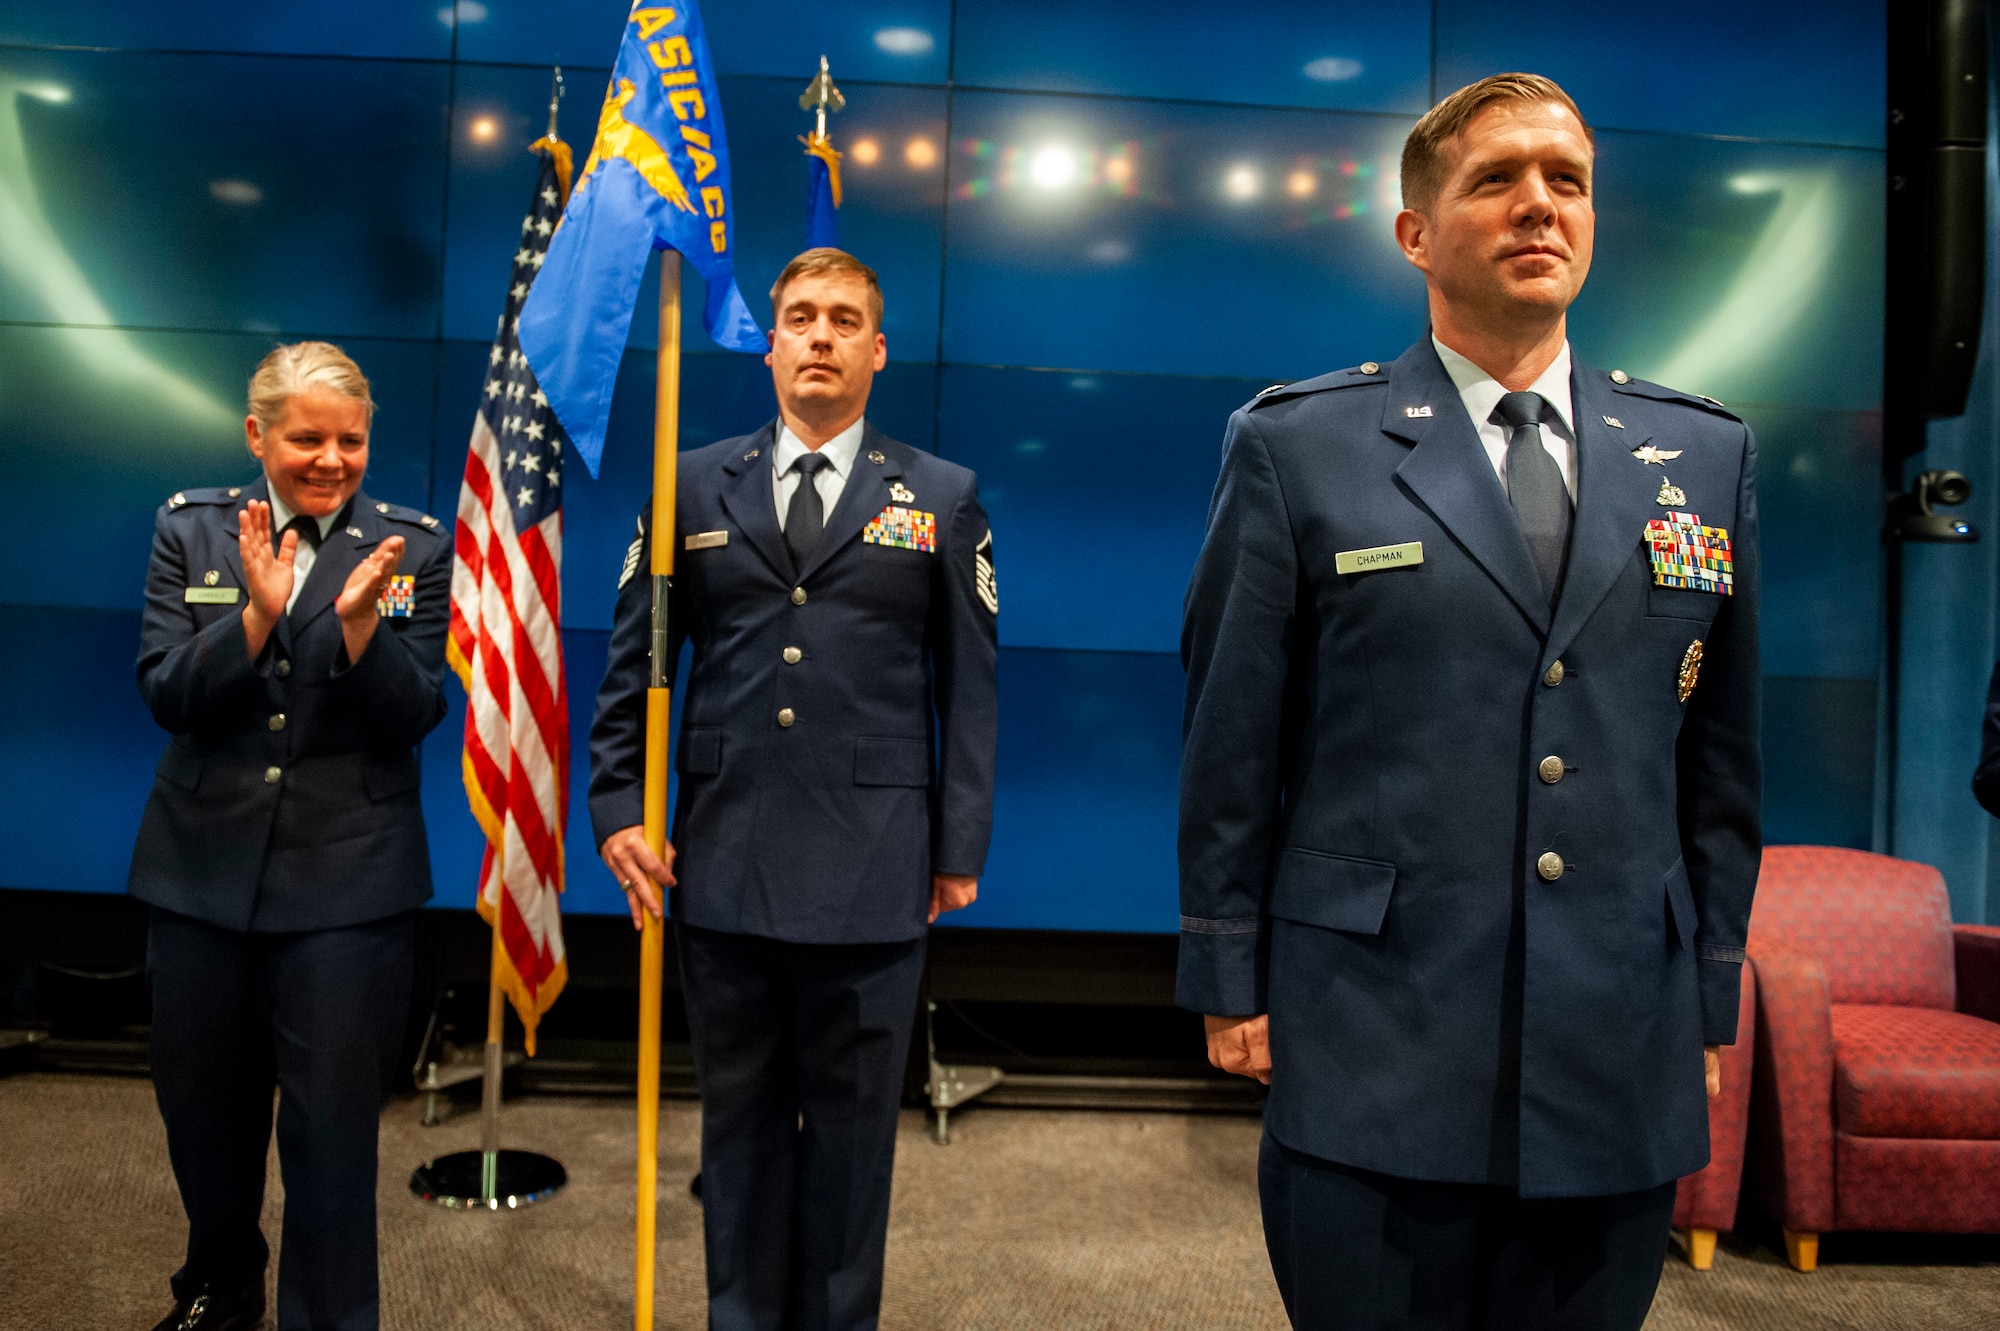 Lt. Col. Joseph D. Chapman, inbound Information Warfare Analysis Squadron commander, stands at attention as Col. Catherine A. Gambold, Air and Cyberspace Intelligence Group commander, leads a round of applause in recognition of Chapman’s new role as squadron commander, June 29, Wright-Patterson Air Force Base. Chapman previously served as the deputy chief of the Information Warfare Division at Ramstein Air Base, Germany. (U.S. Air Force photo by Senior Airman Kristof J. Rixmann)